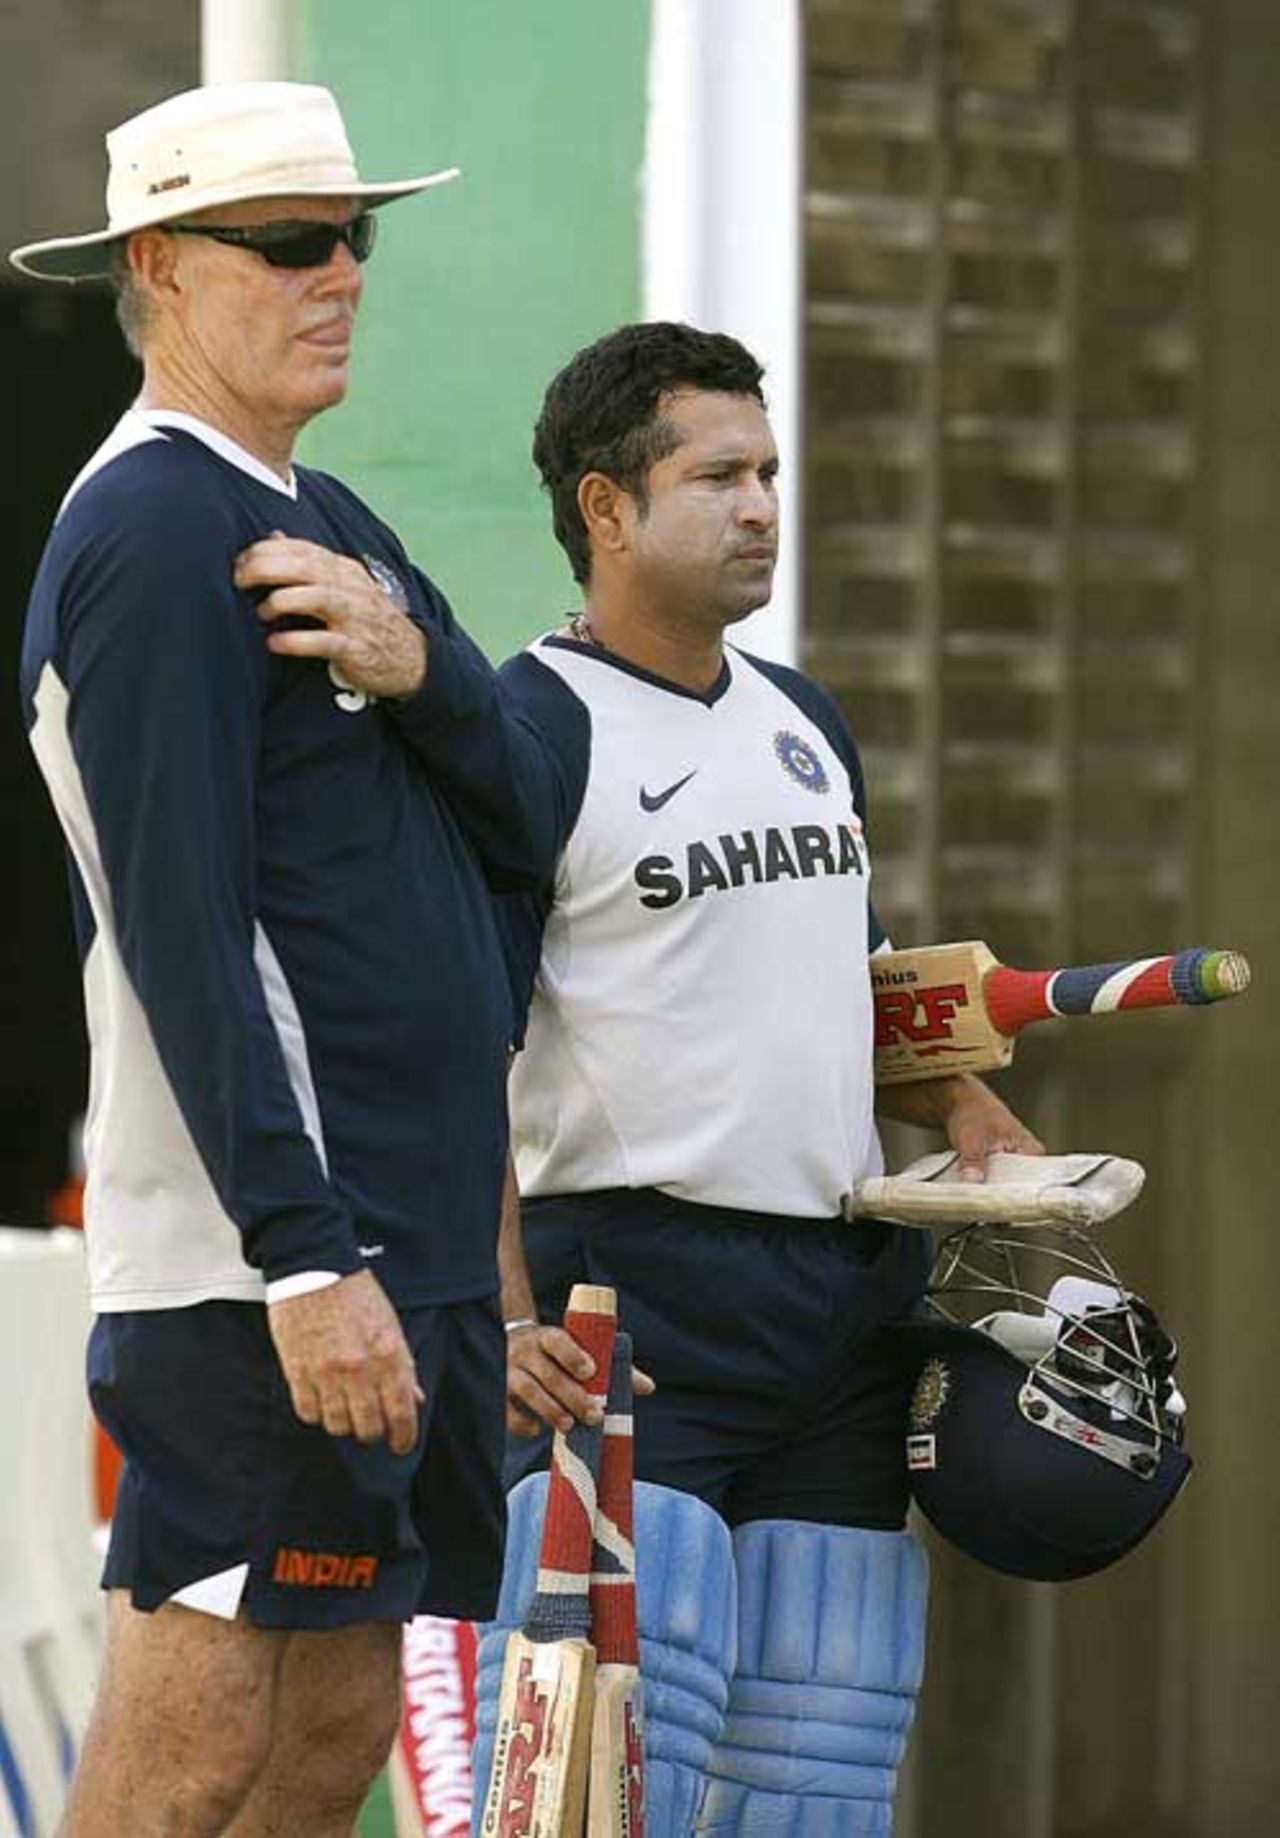 Greg Chappell and Sachin Tendulkar watch the Indian team practice at Port-of-Spain